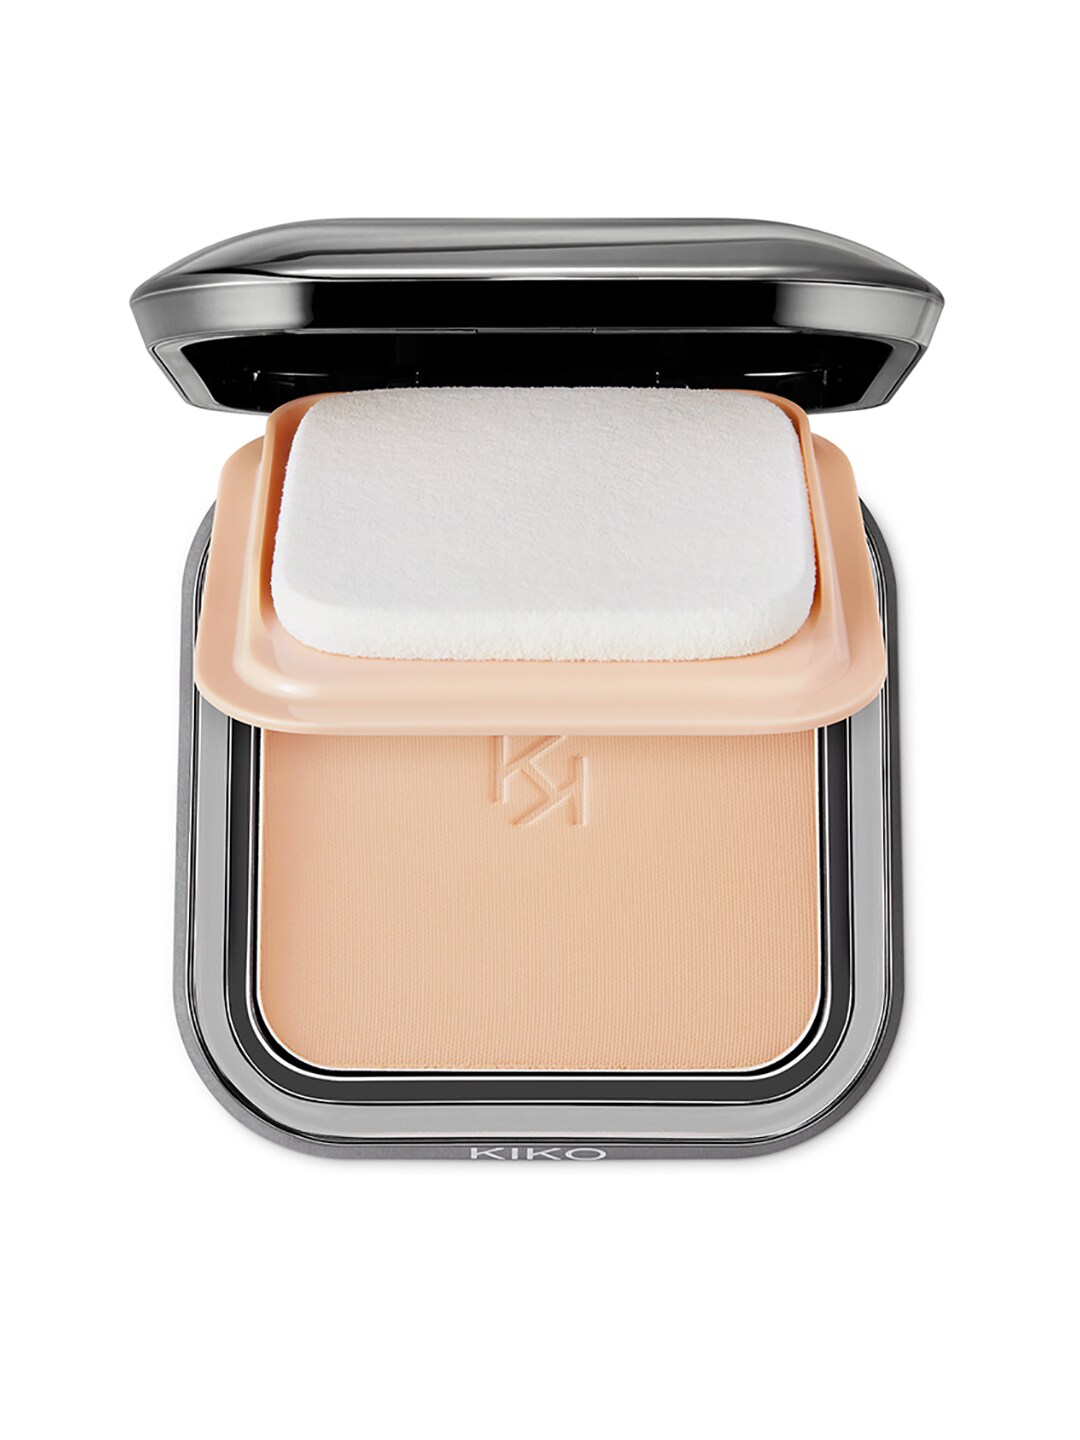 KIKO MILANO Weightless Perfection SPF 30 Wet and Dry Powder Foundation N40 Price in India